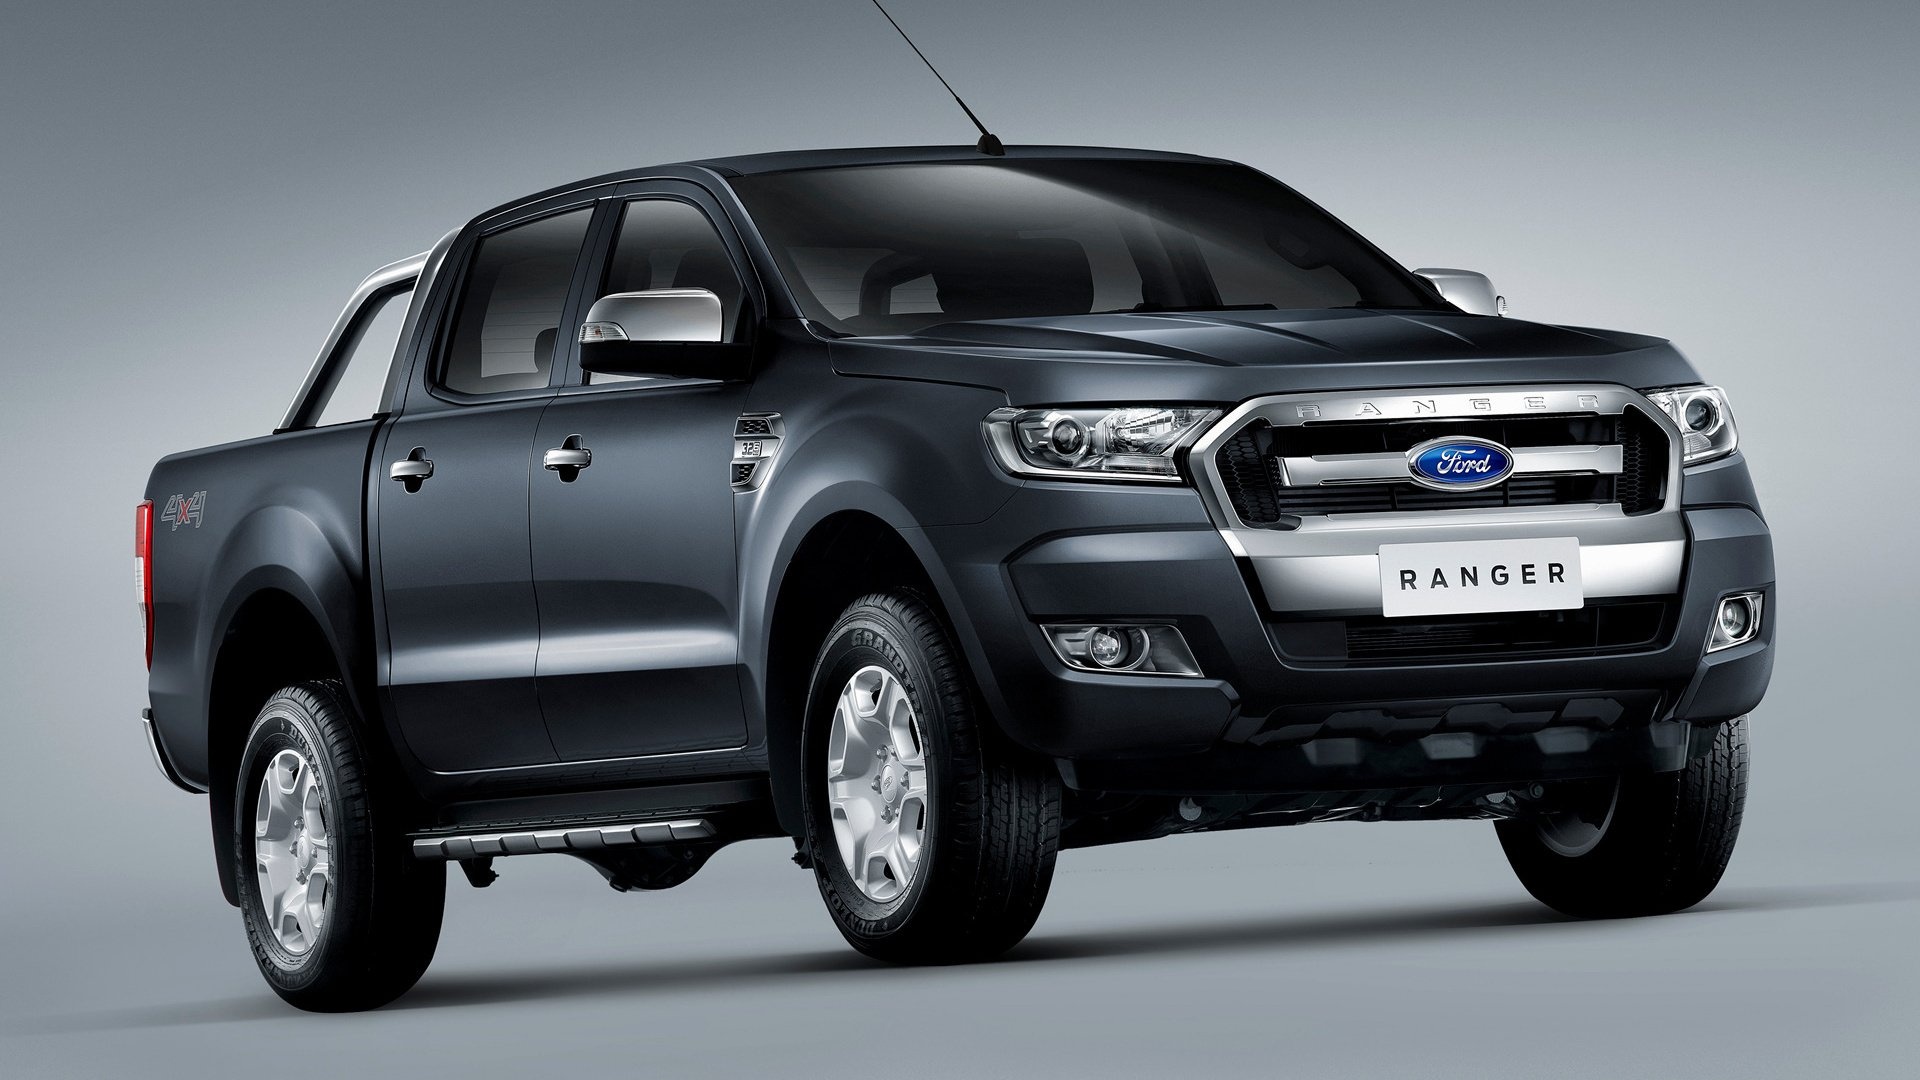 Ford Ranger: The model STX was introduced in 1985 on the West Coast of the United States. 1920x1080 Full HD Wallpaper.